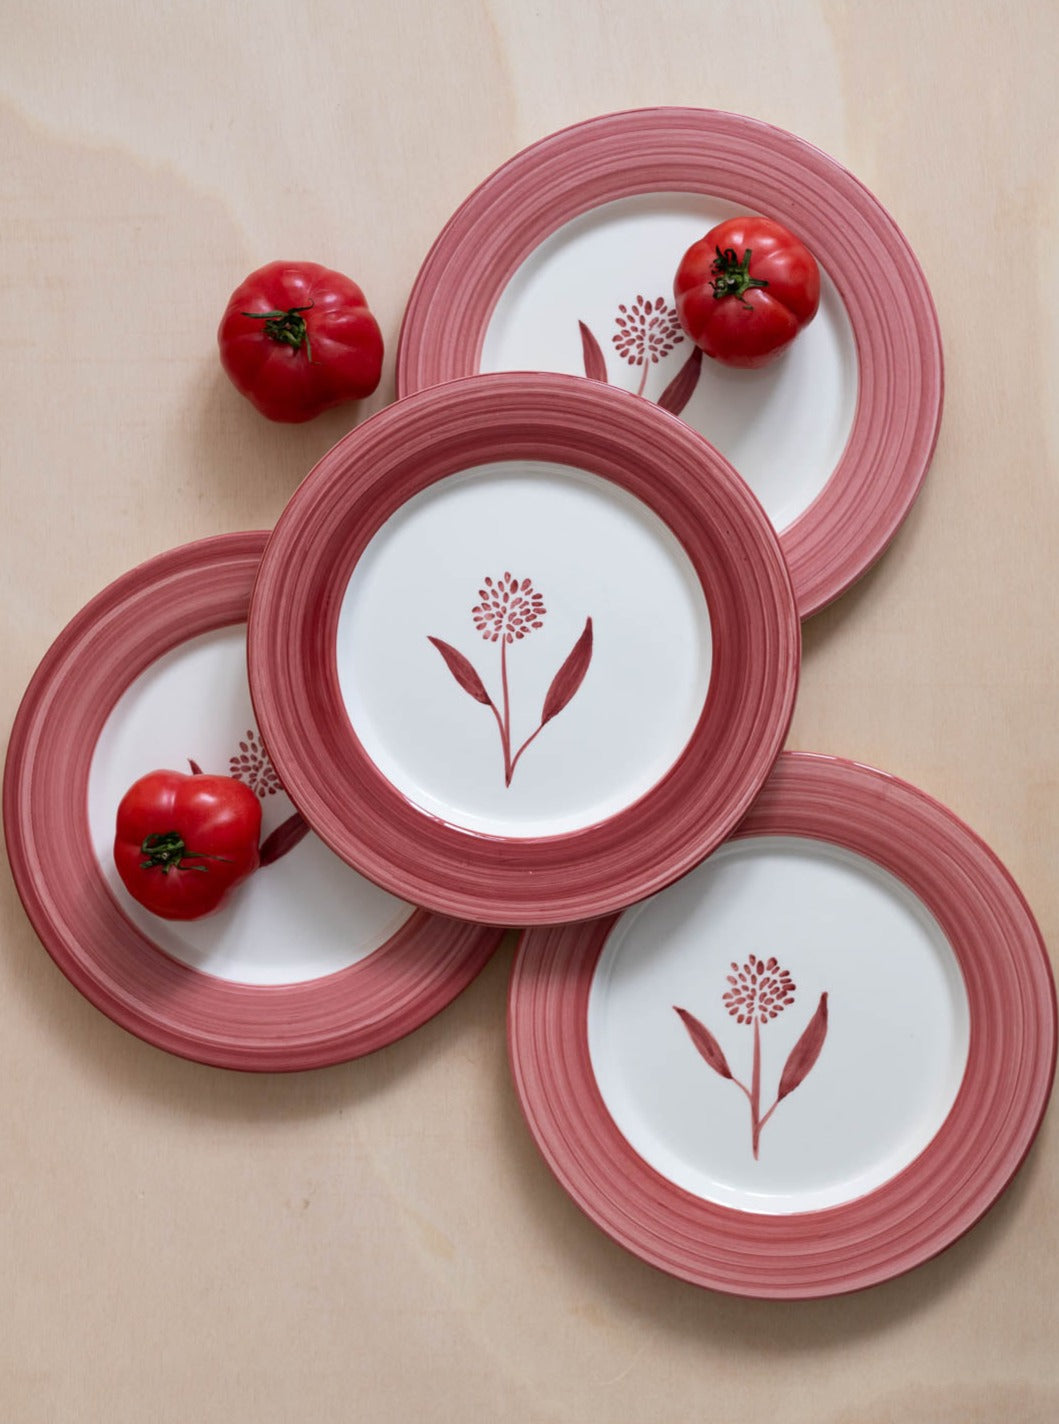 Set of 4 Cecilia Hand-Painted Ceramic Dinner Plate - Red and White - Front Image